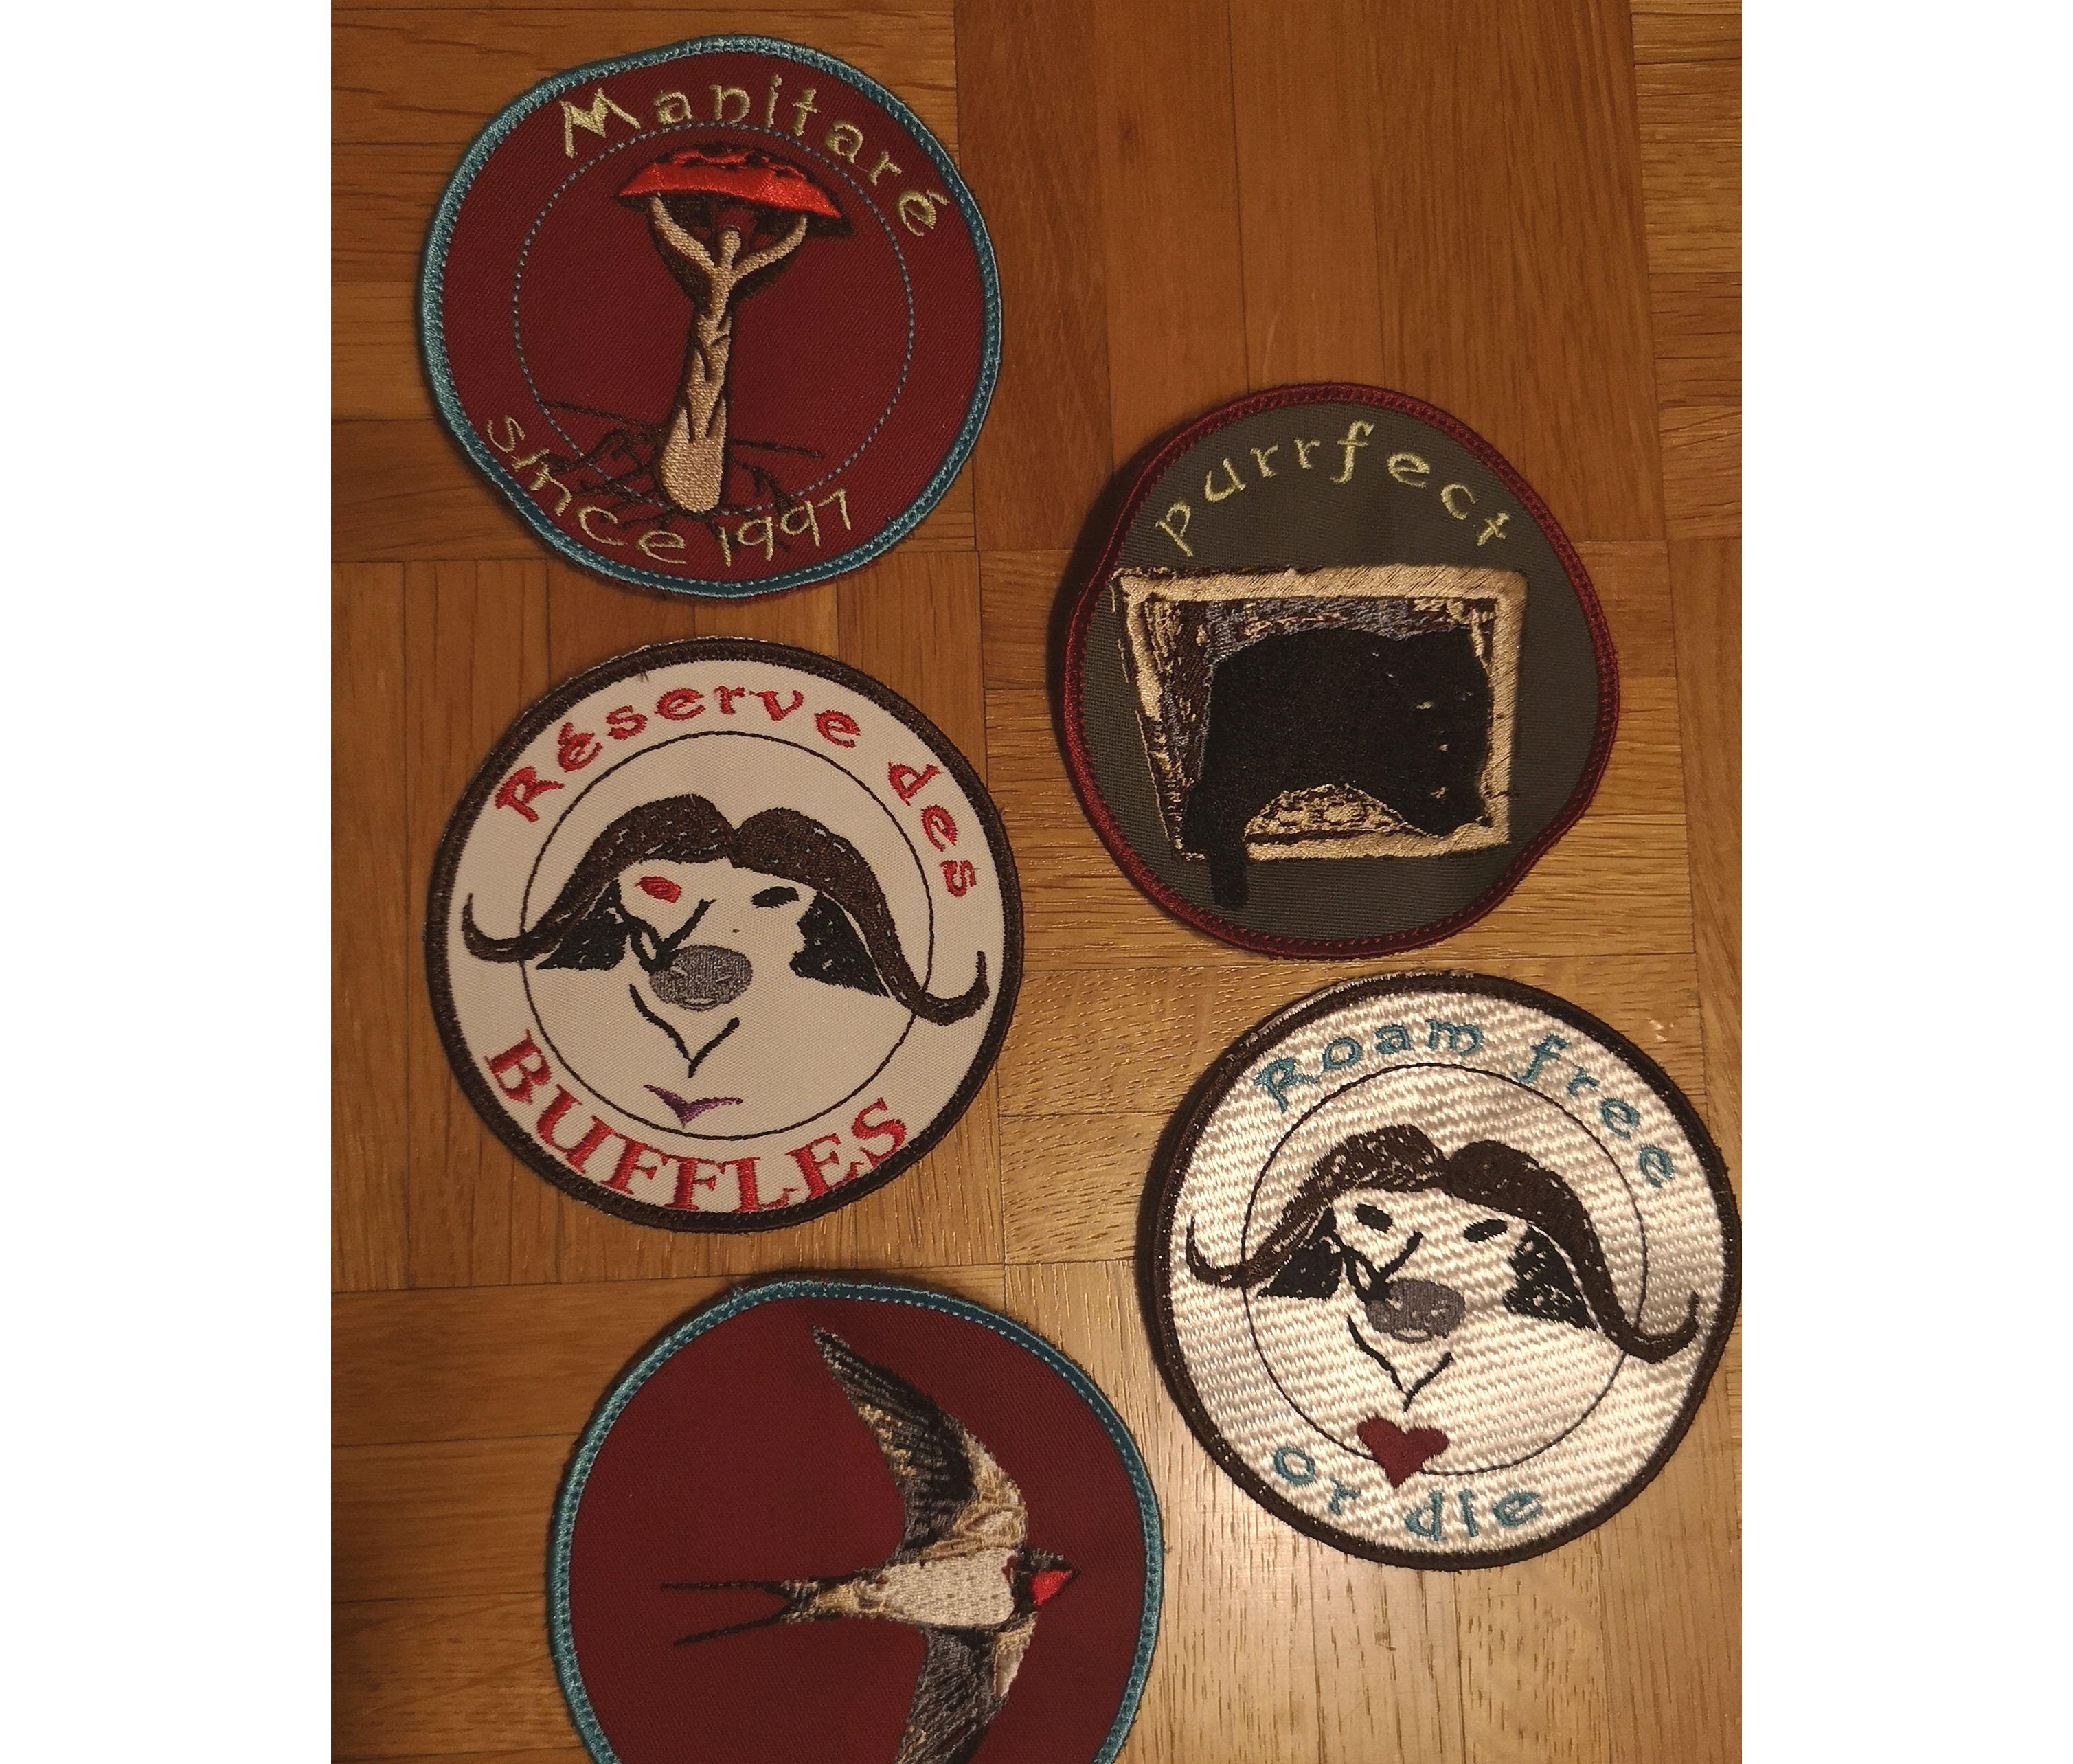 Badges made by importing handdrawn images and jpg lowres photos into <a href='http://stitchera.com/design_era/stitch-era.asp'>StitchEra</a> and vectorizing them, and reducting the number of colours.